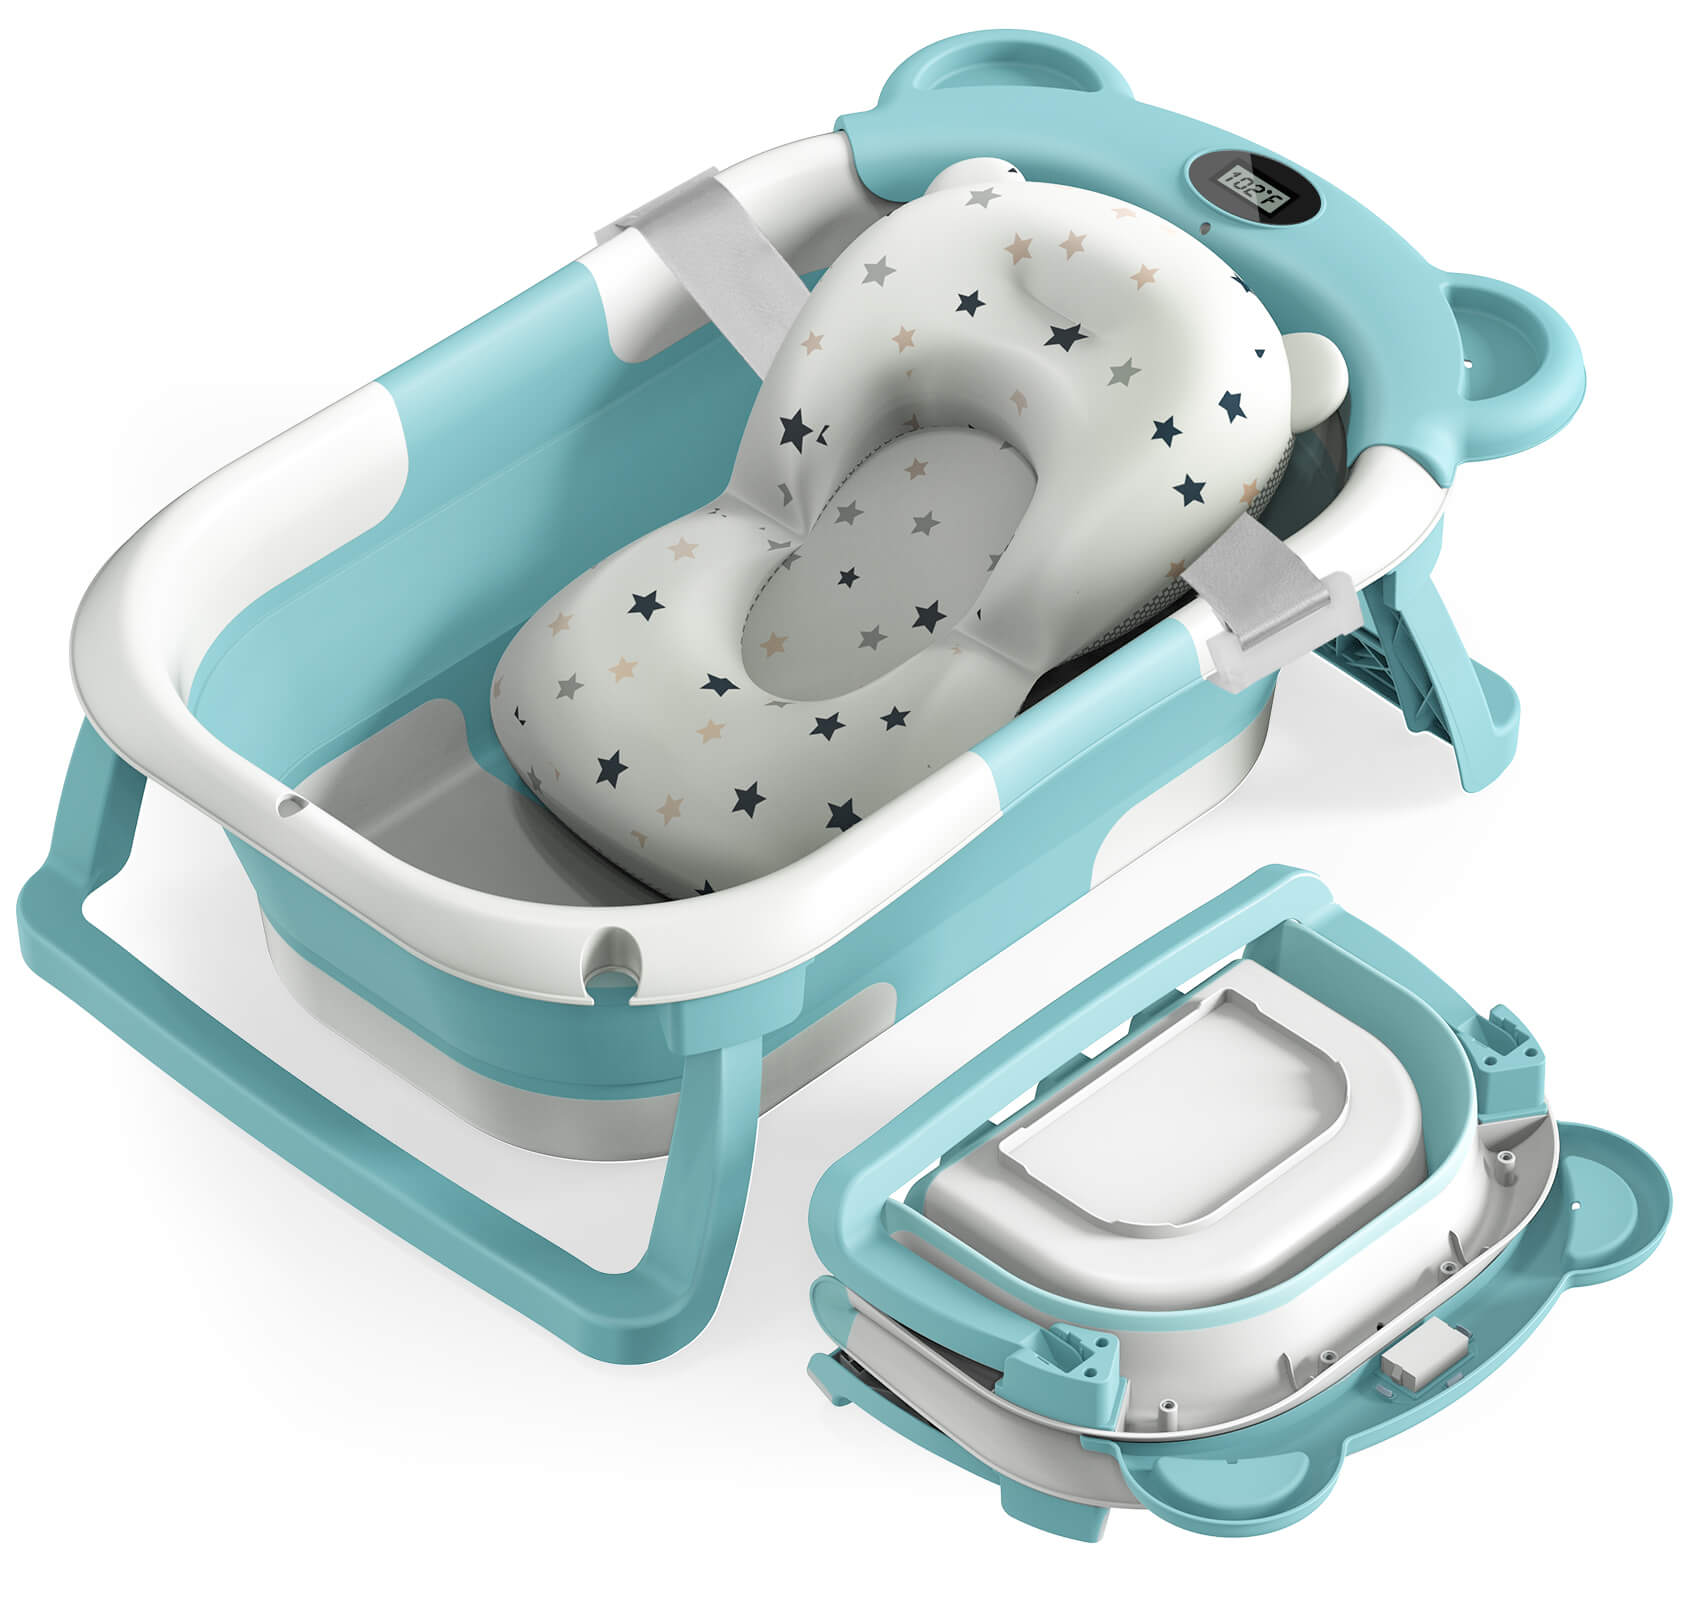 Superb Baby - Foldable baby bath kit with cushion, thermometer and